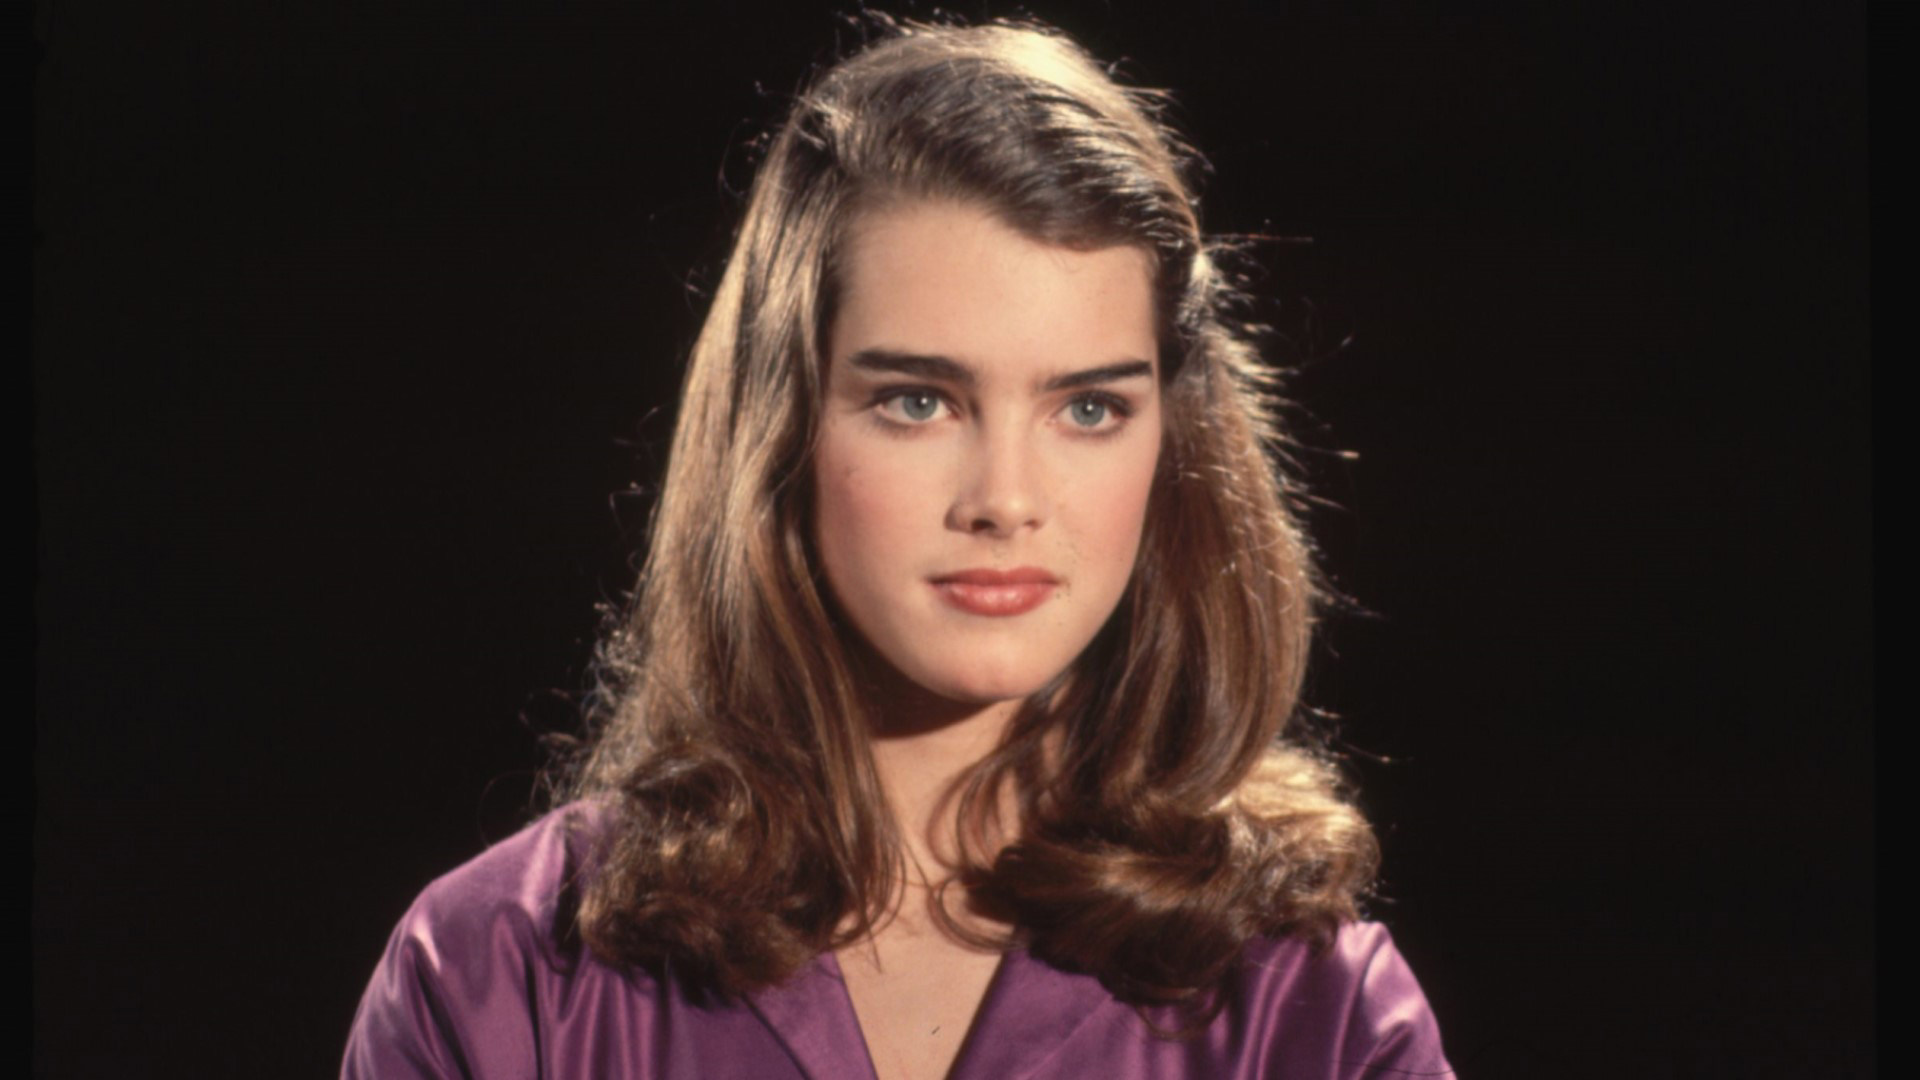 Pretty Baby See How Brooke Shields Changed Since The Blue Lagoon